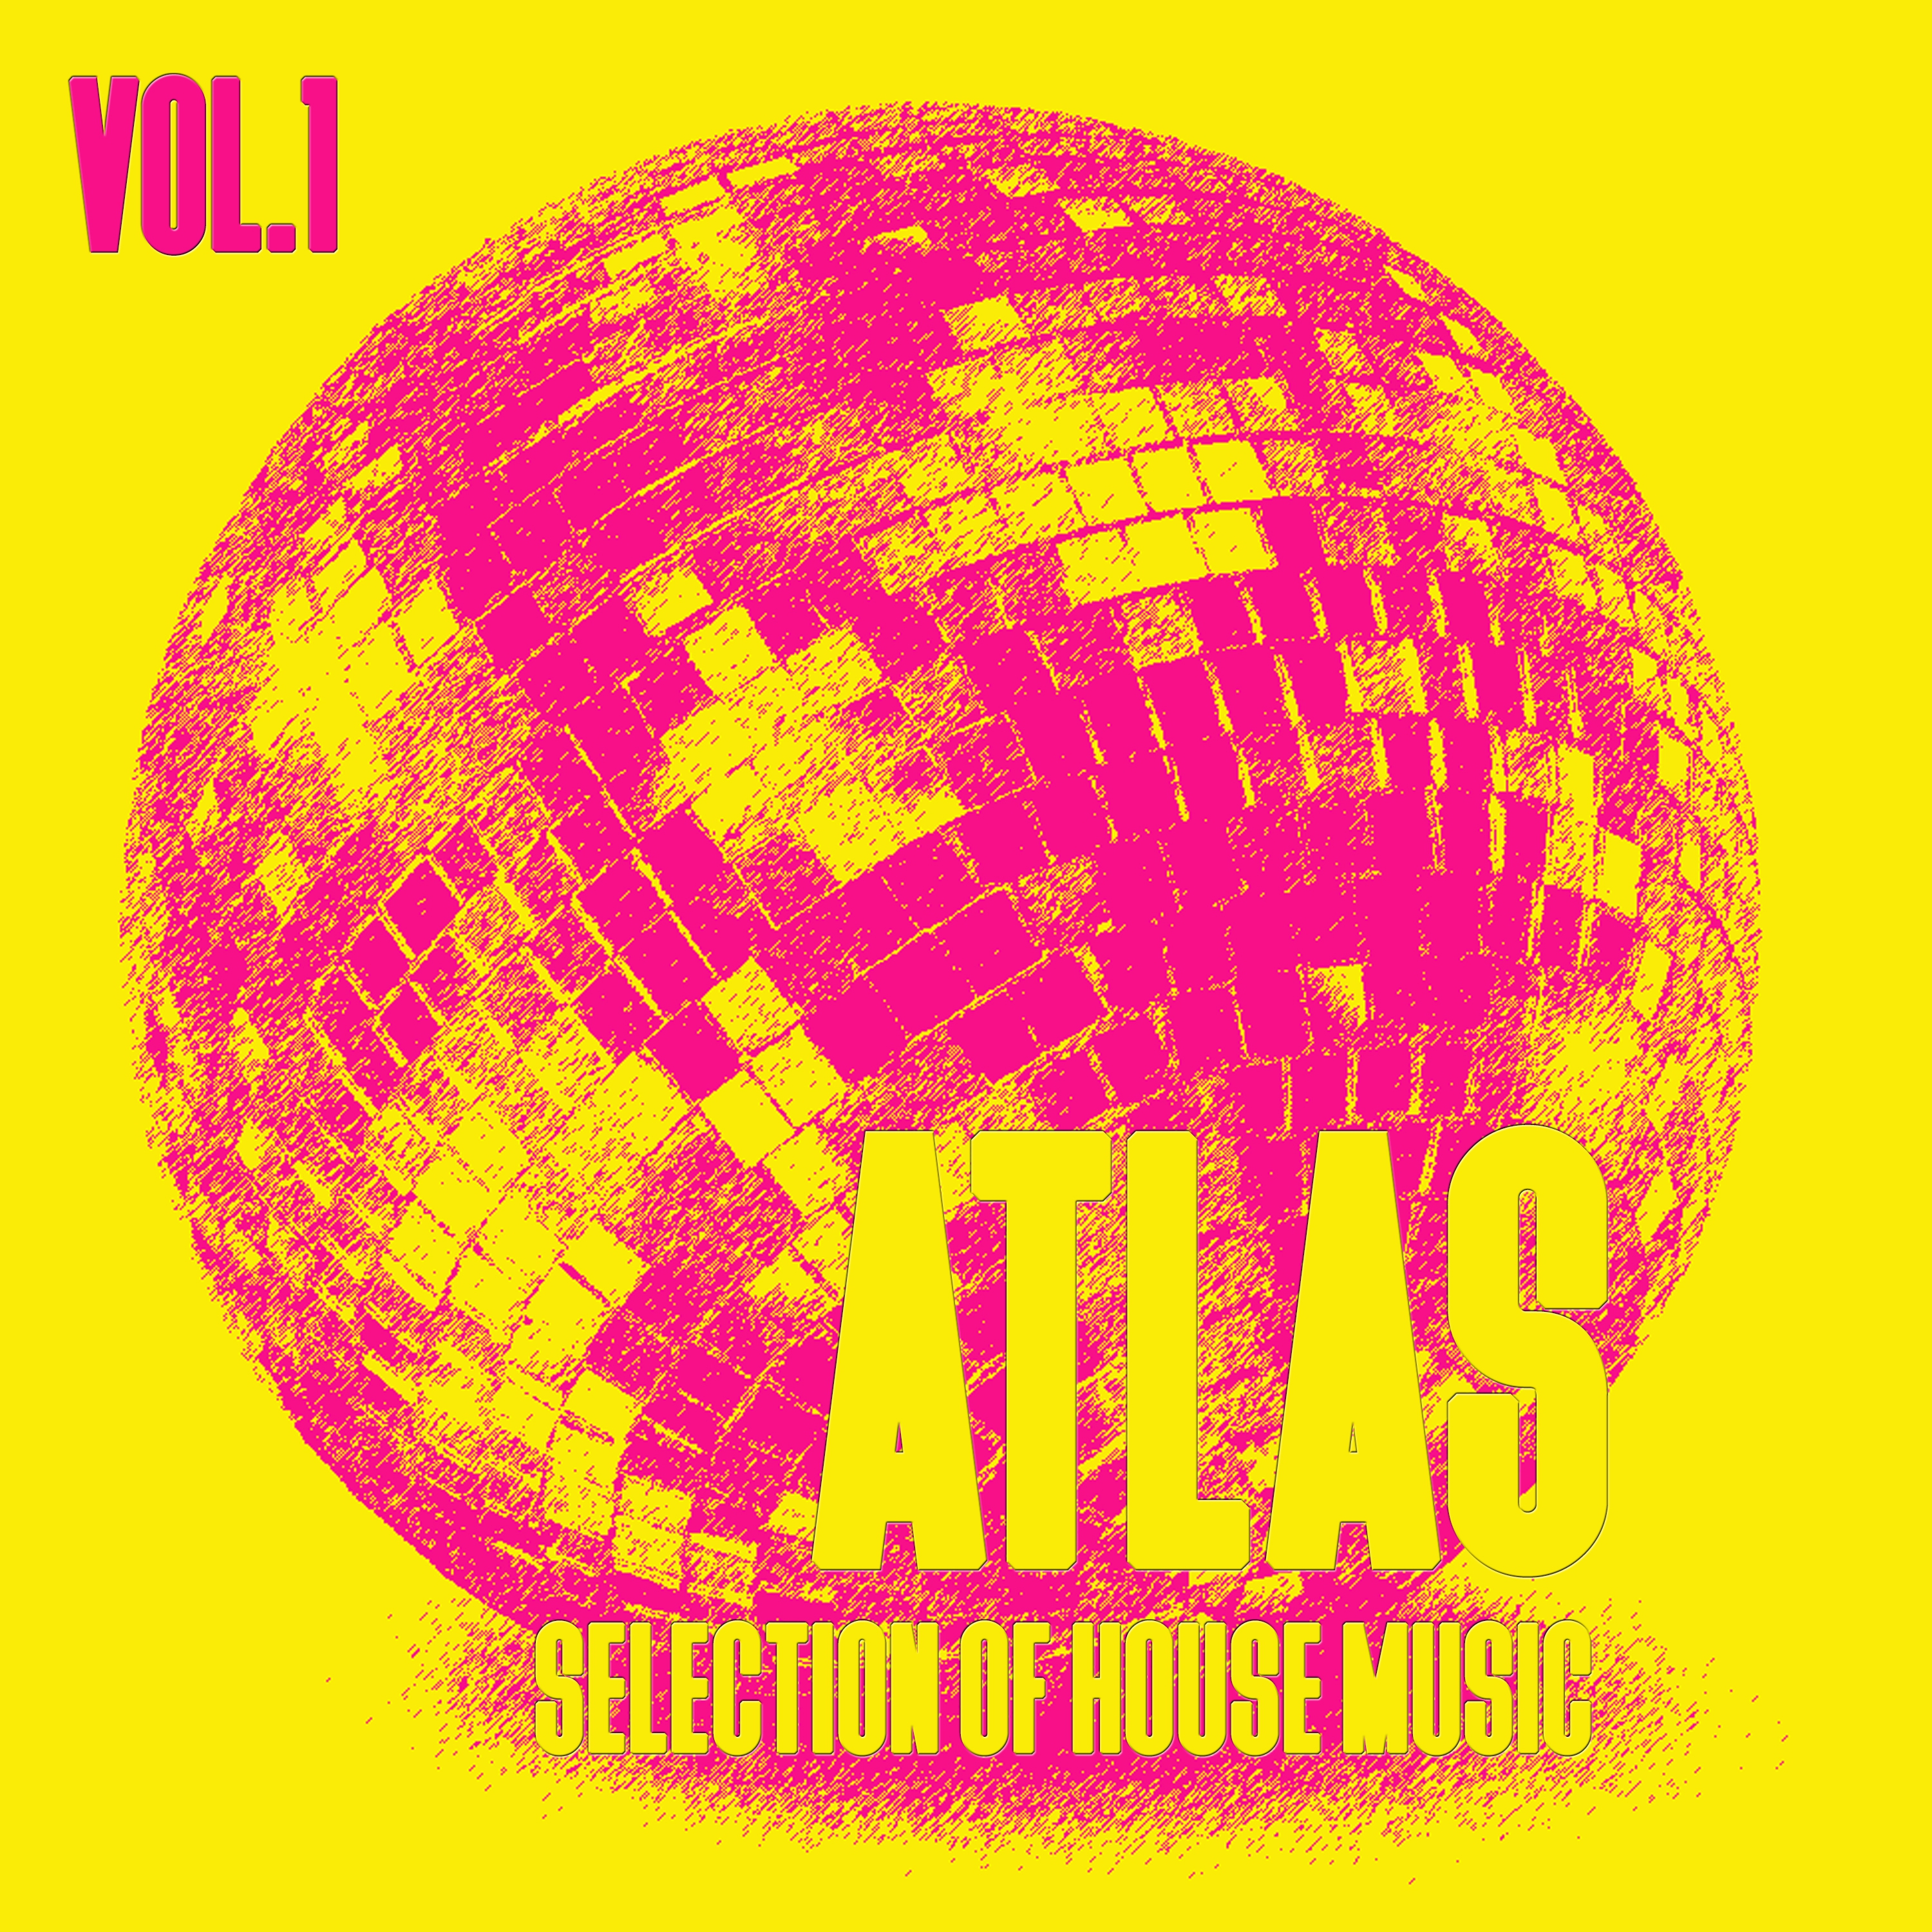 Atlas, Vol. 1 - Selection of House Music